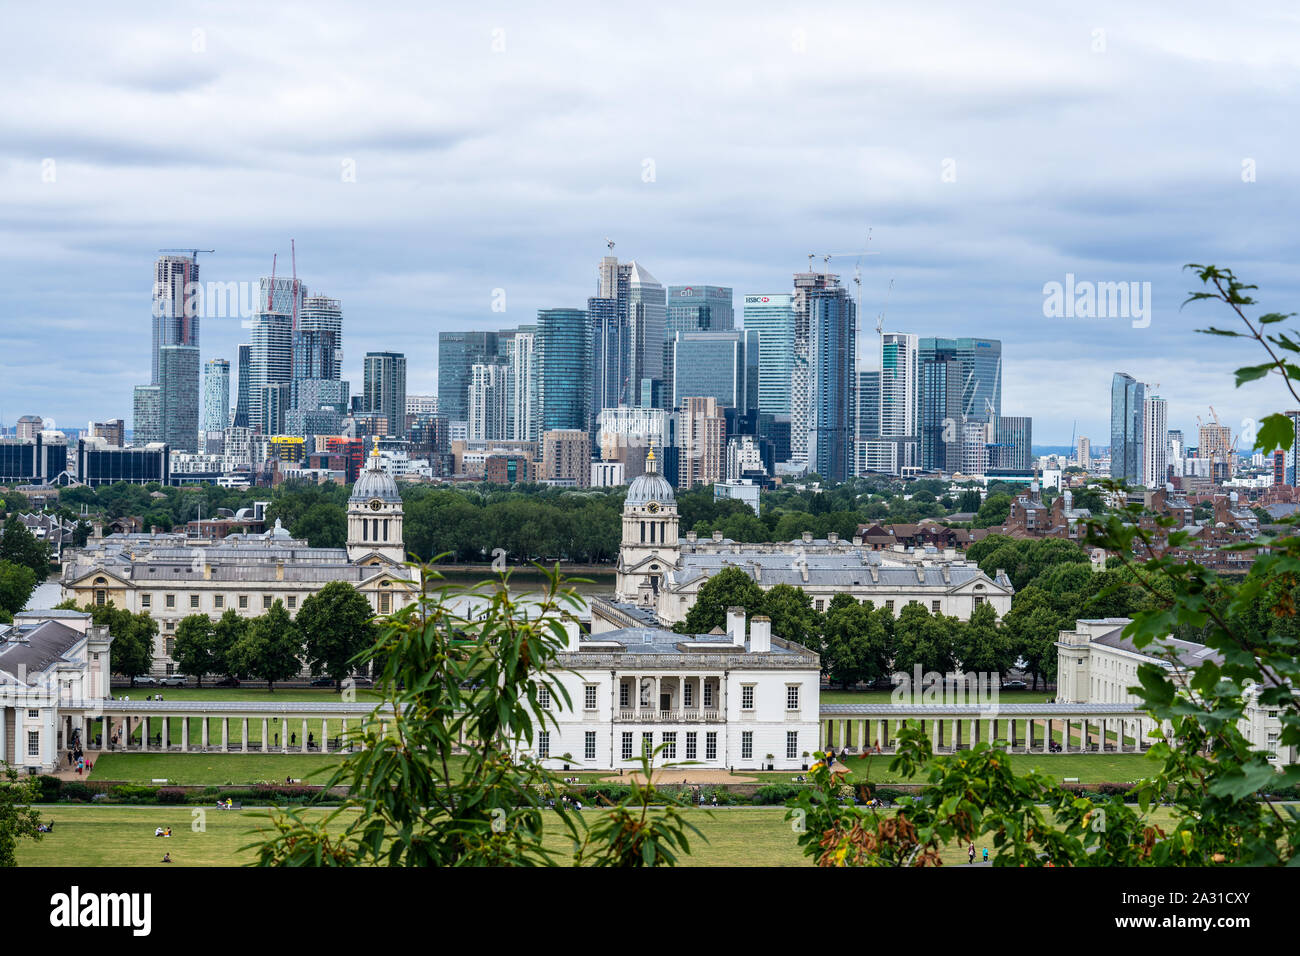 London, UK, July 28, 2019. The best view of London.For the very best natural view of the city there is, come to Greenwich. Stock Photo